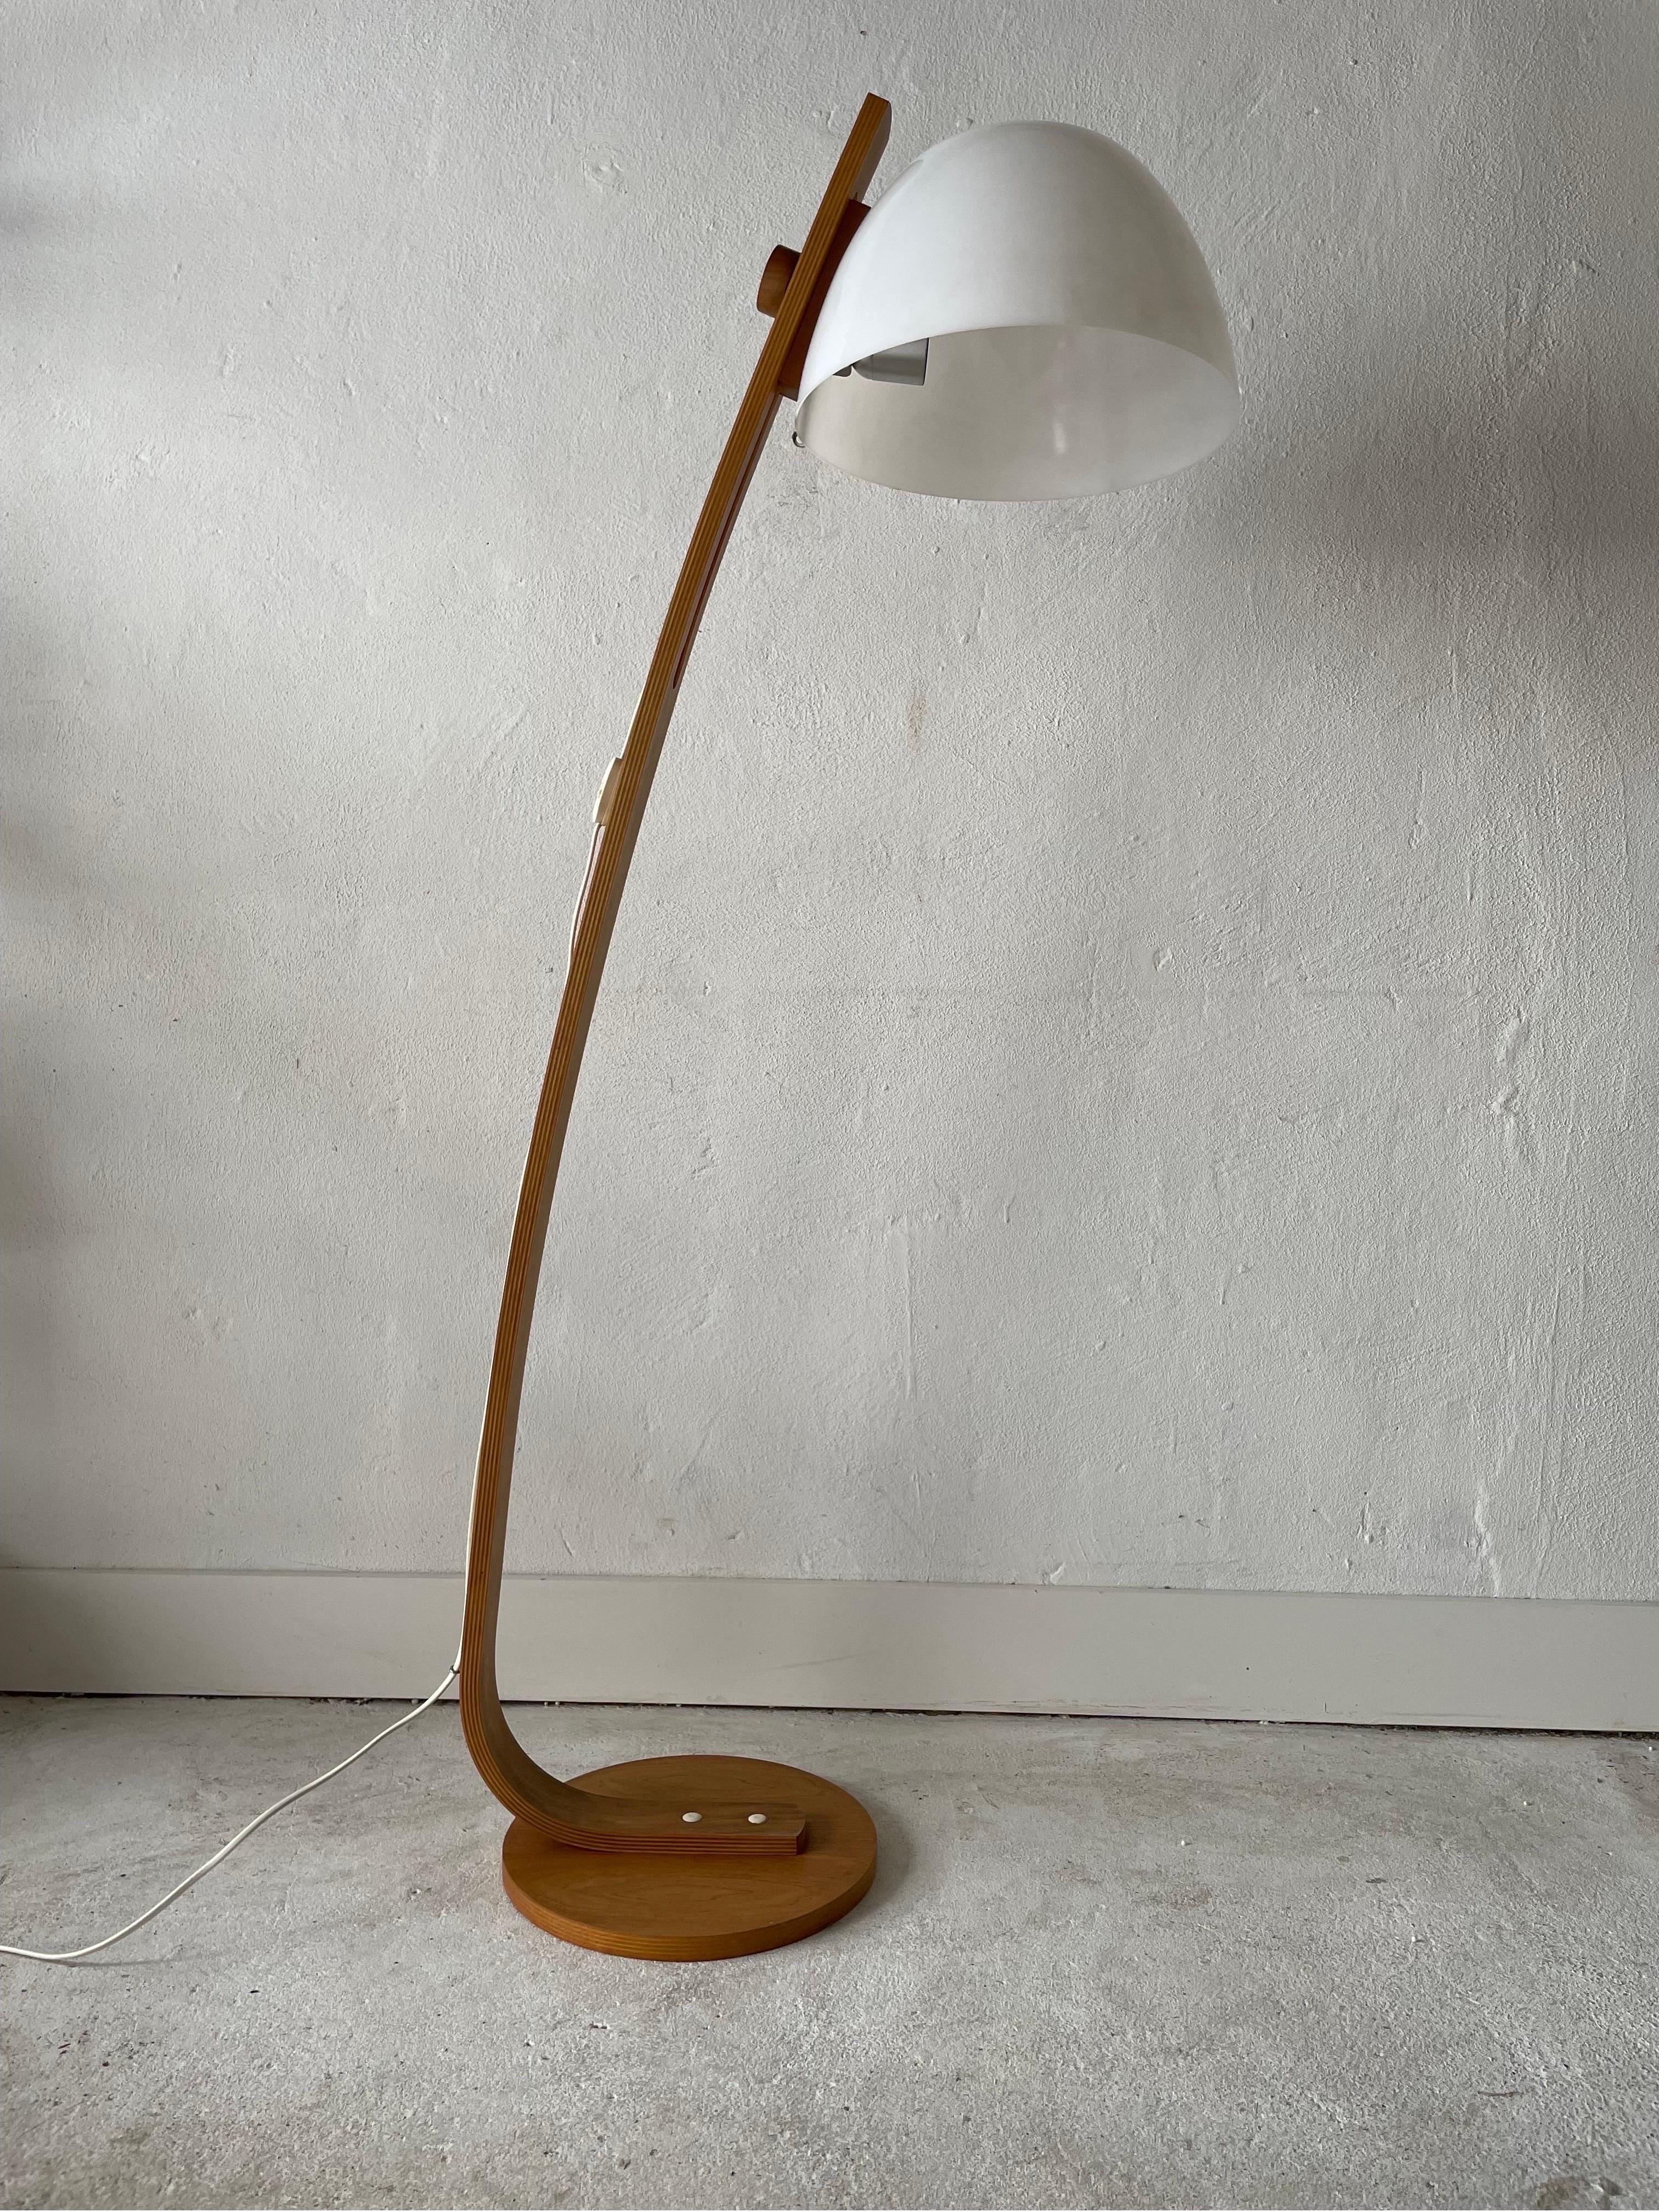 Plexiglass and bent plywood body space age floor lamp by Temde, 1970s, Switzerland

Lamp is in very good vintage condition.

This lamp works with E27 light bulb. Max 100W
Wired and suitable to use with 220V and 110V for all